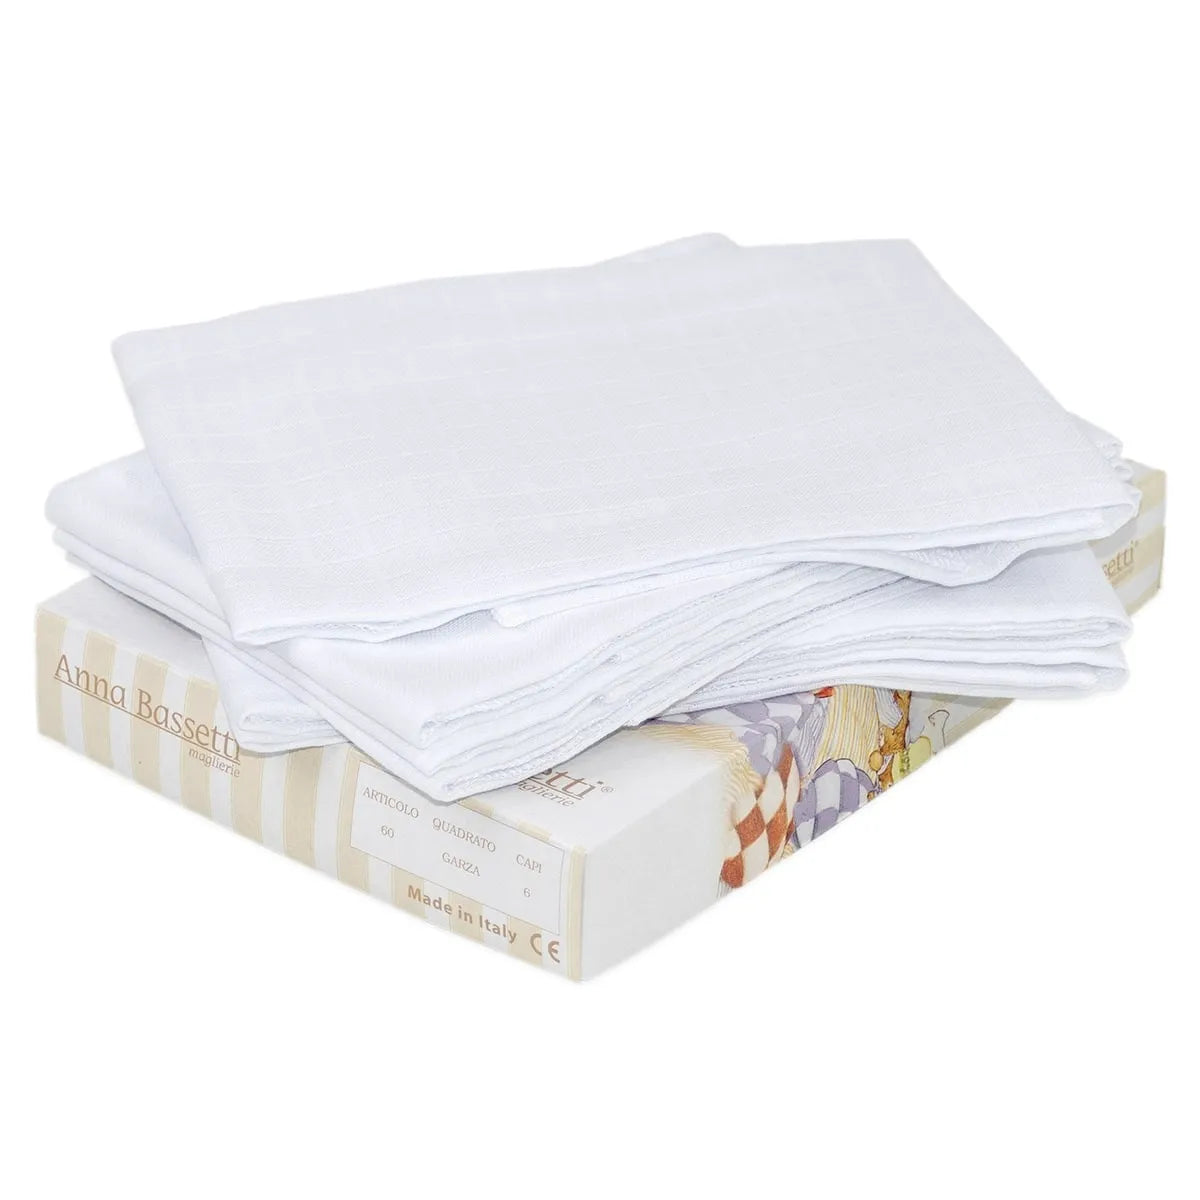 Anna Bassetti Pack of 6 Gauze Squares 100% Hypoallergenic Cotton S20